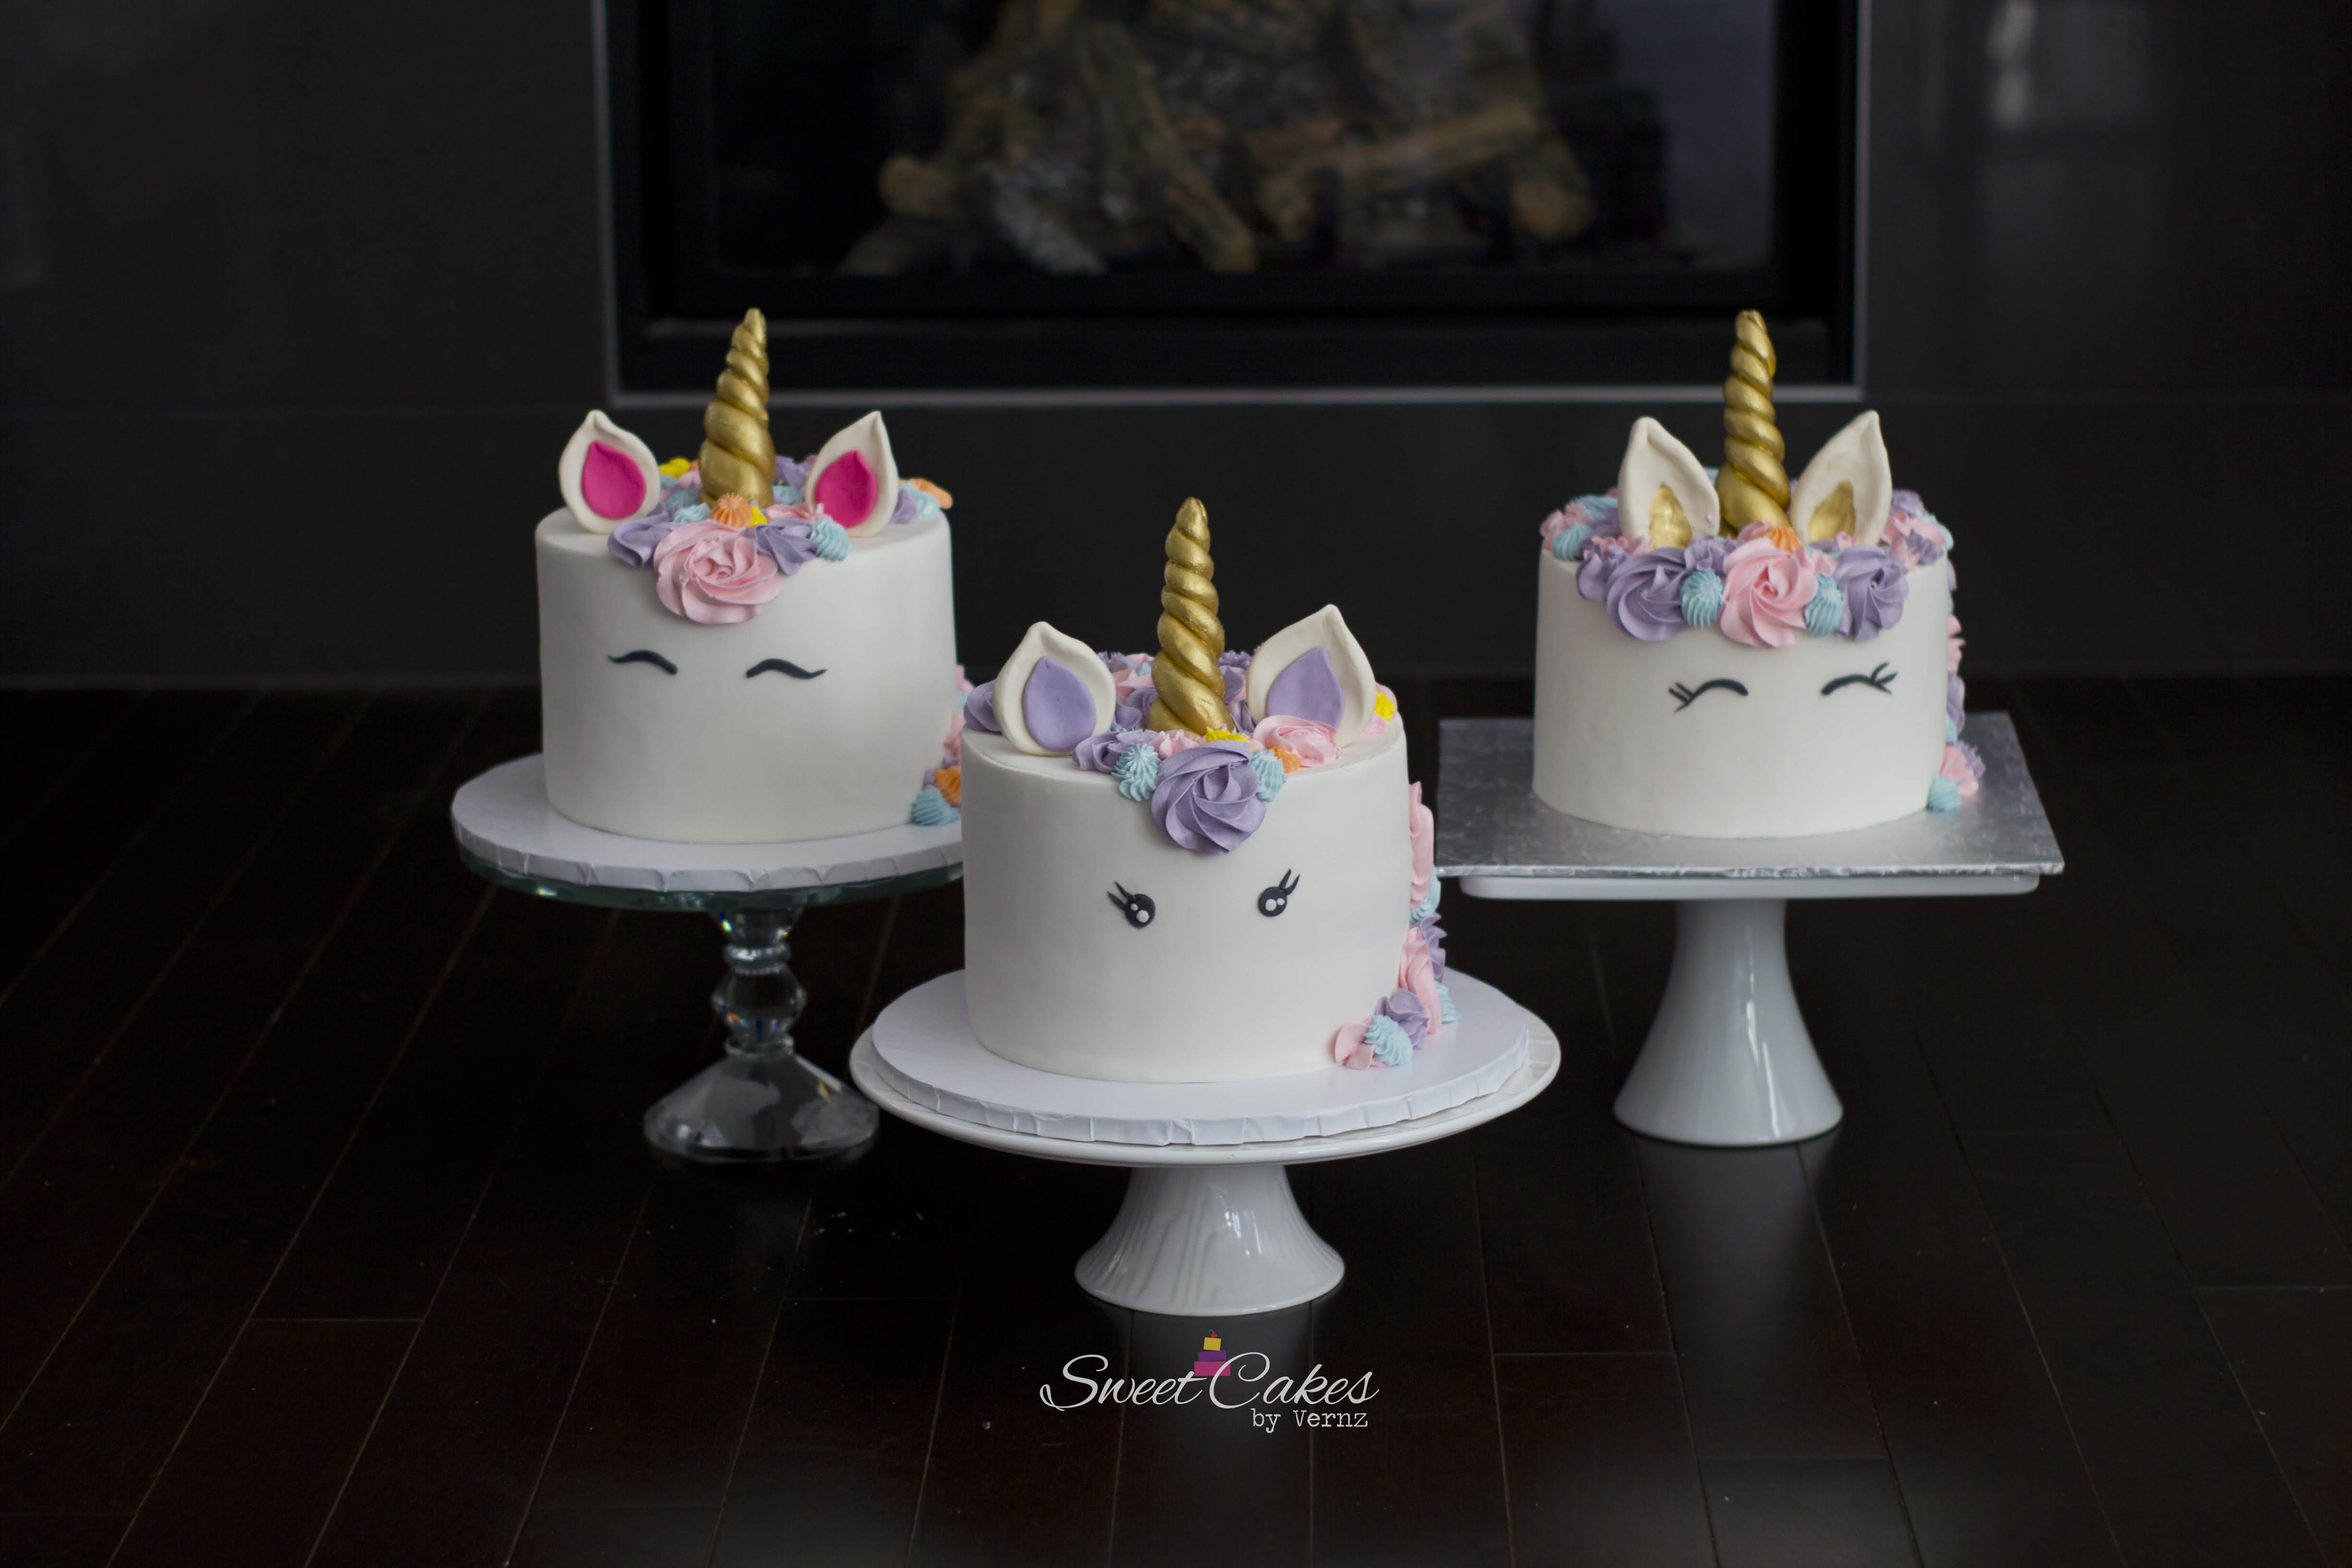 This is a cute birthday cake that we have in our special cakes collection. Our cakes are locally made in Calgary. Great for your daughter's cake!